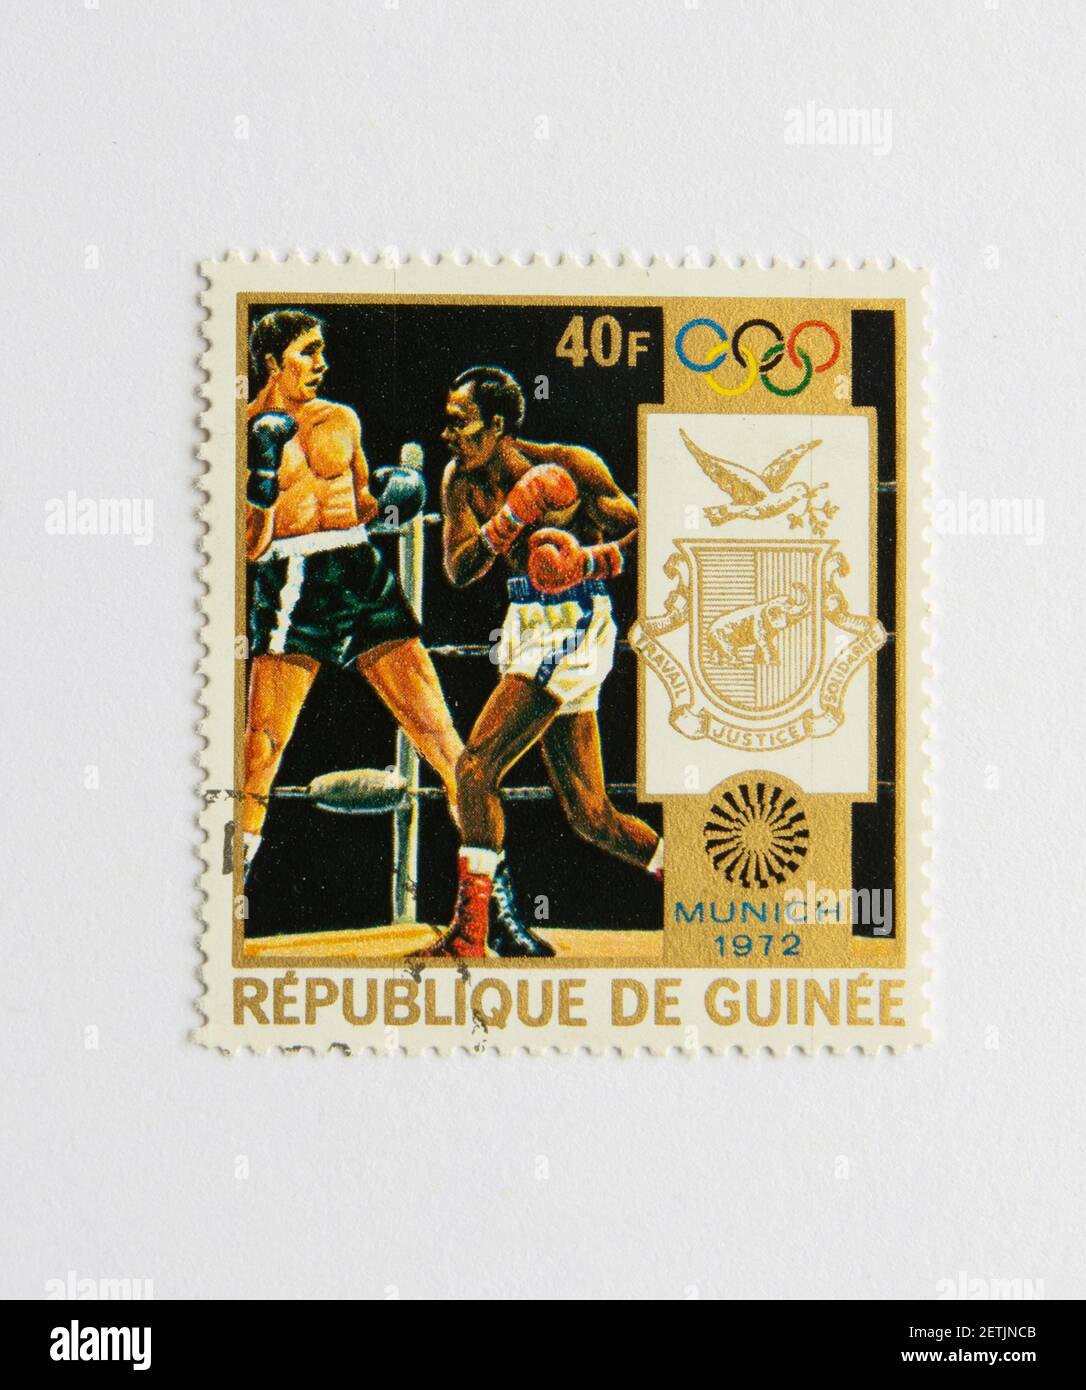 01.03.2021 Istanbul Turkey. Guinea Republic Postage Stamp. circa 1972. munich olympic games. Boxing Stock Photo